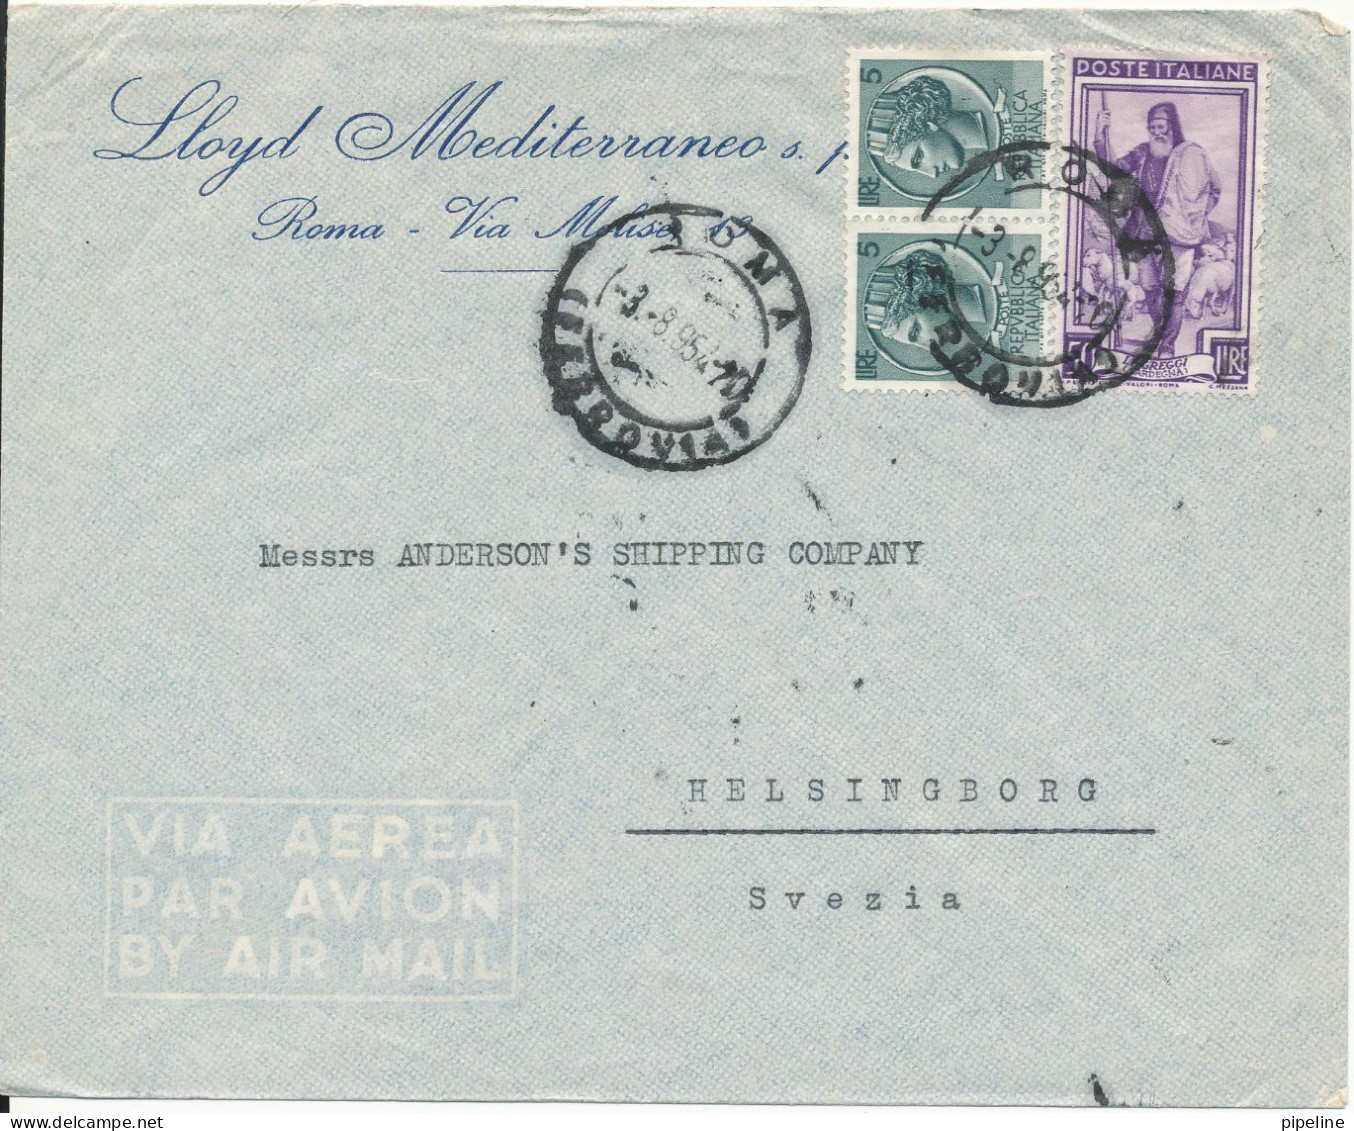 Italy Air Mail Cover Sent To Sweden Roma 8-9-1954 (the Cover Is Light Folded) - Luftpost